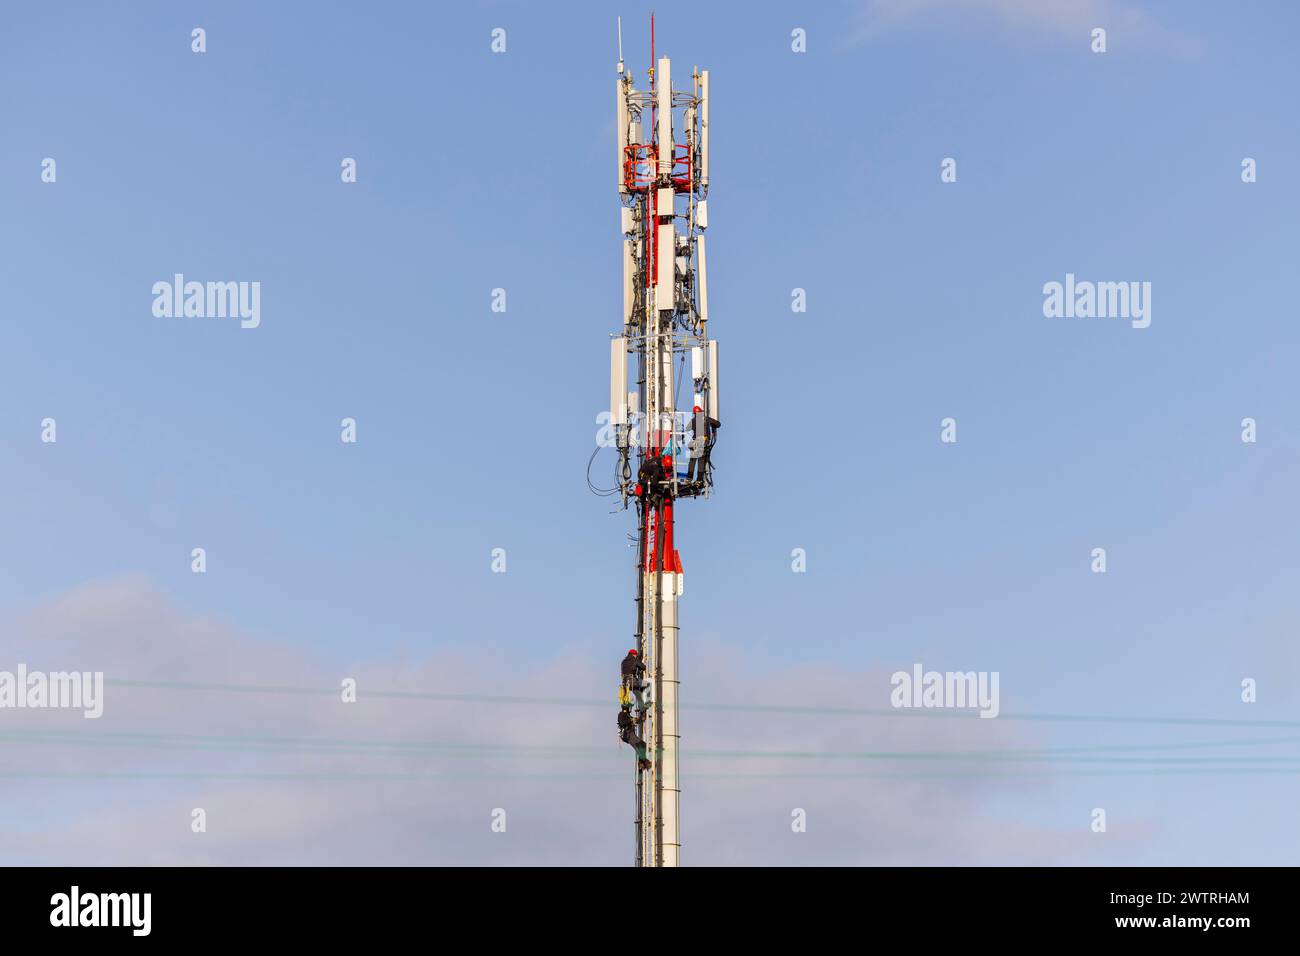 Technicians assembling antennas for 5G cellular communication on a telecommunications tower. Base Station or Base Transceiver Station. Stock Photo